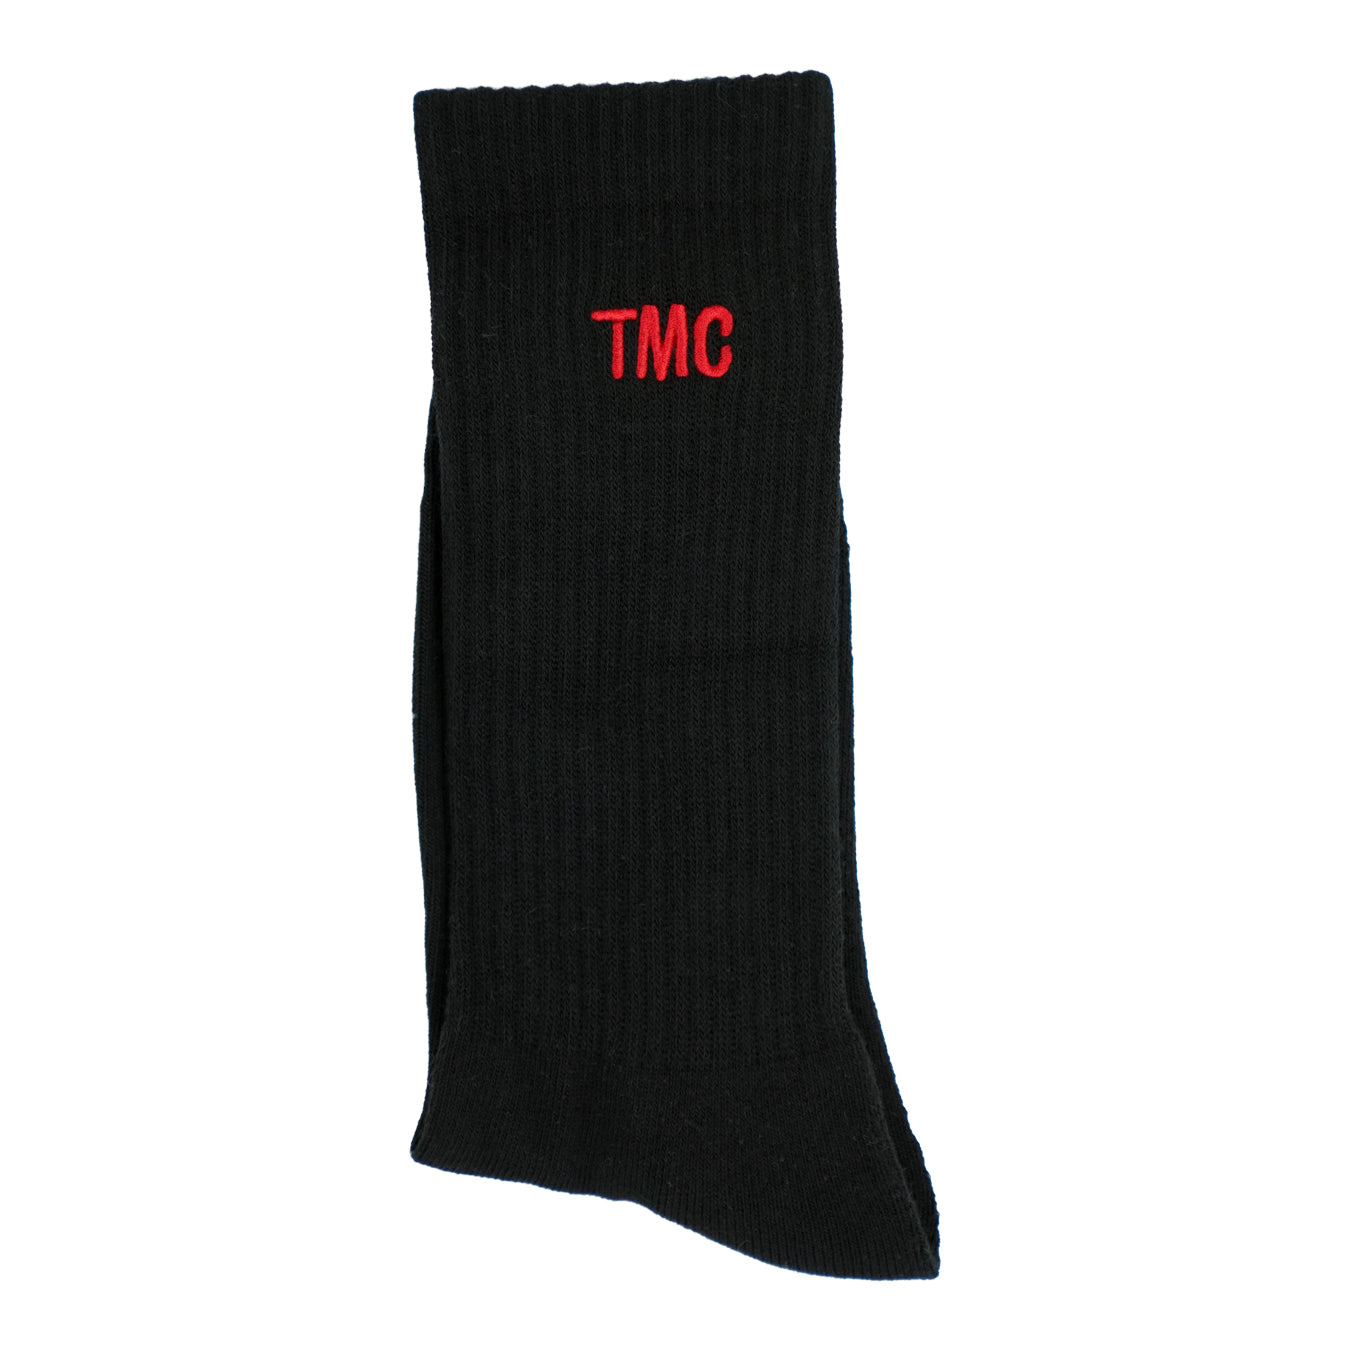 TMC (Embroidered) Sock - Black/Red – The Marathon Clothing